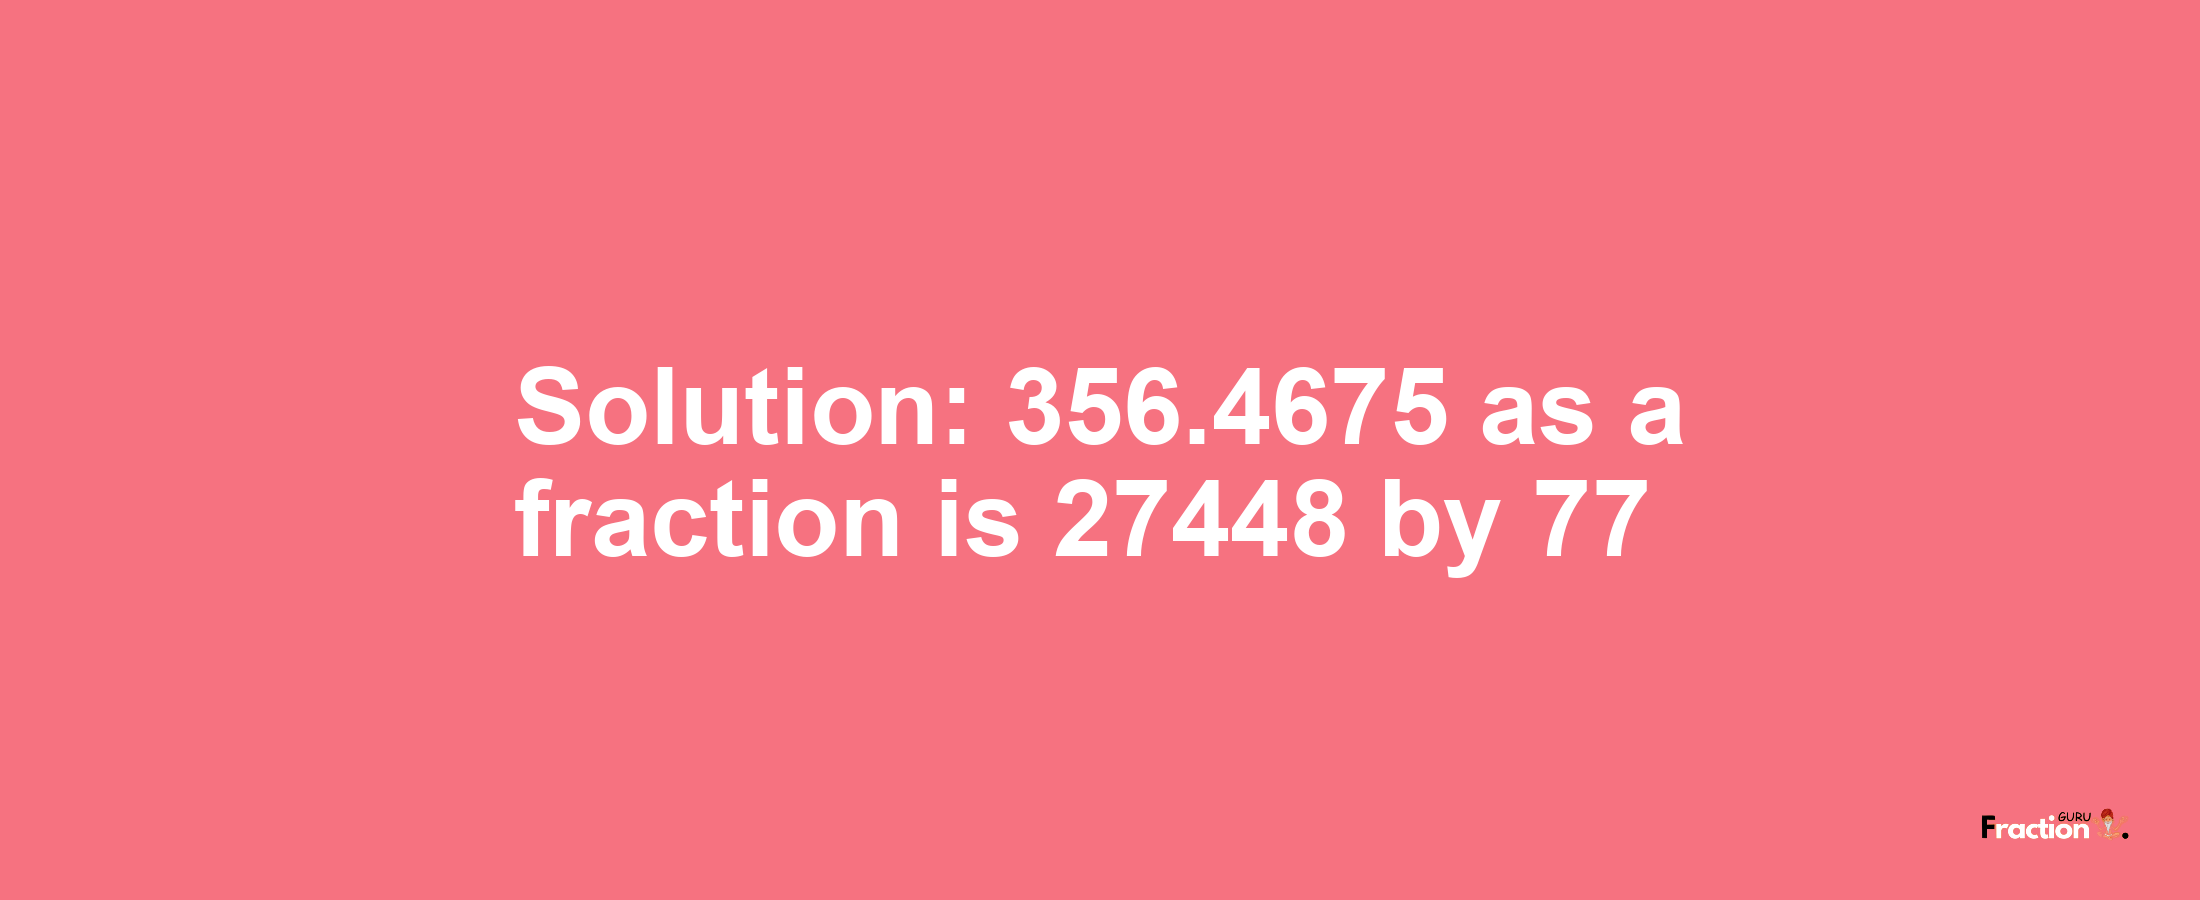 Solution:356.4675 as a fraction is 27448/77